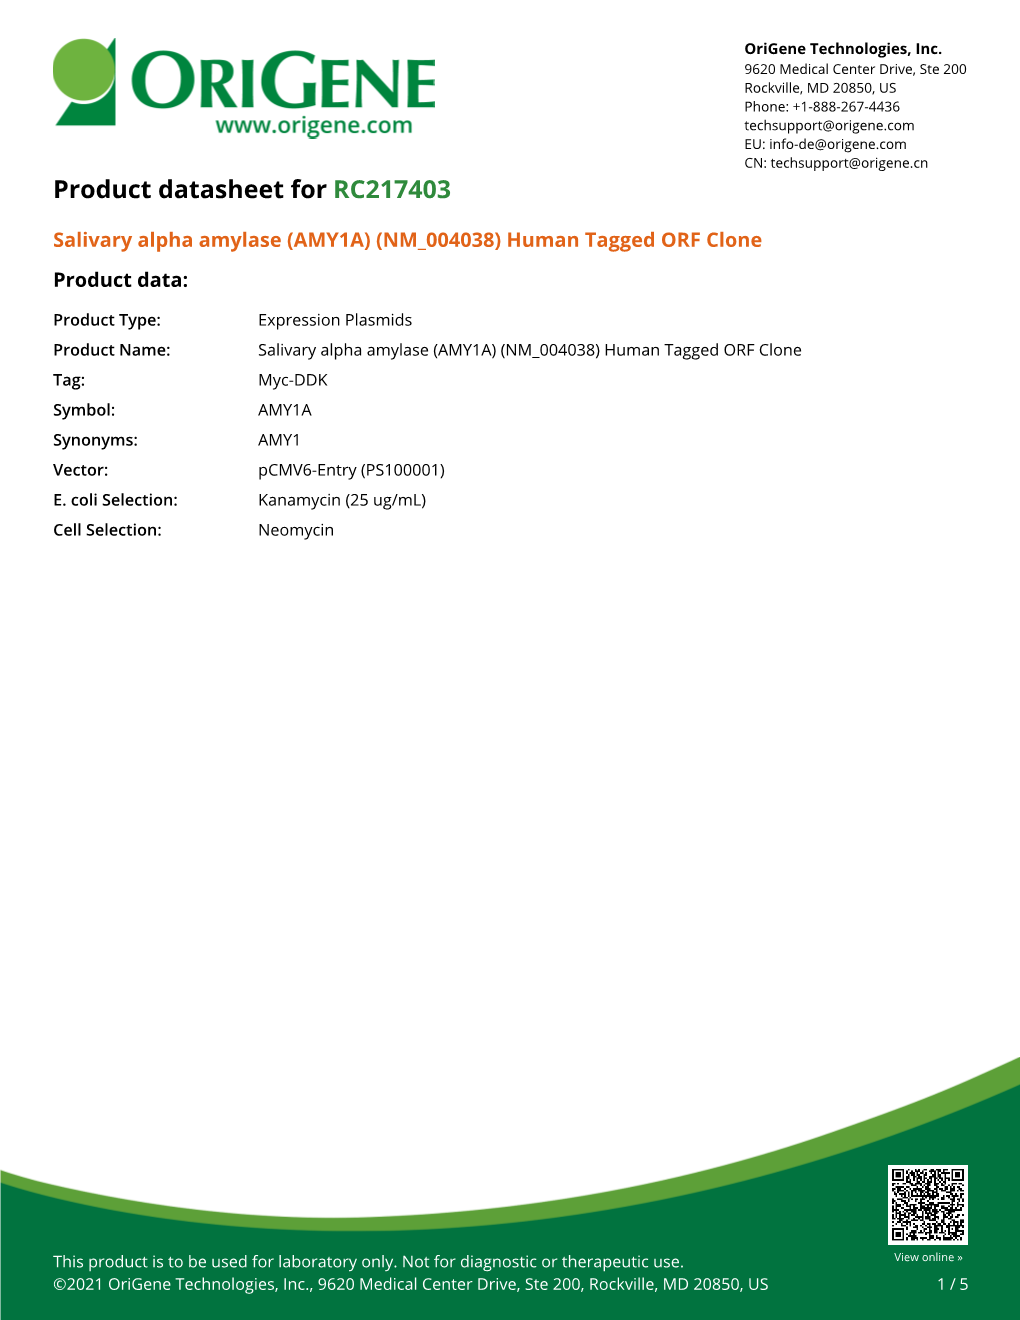 (AMY1A) (NM 004038) Human Tagged ORF Clone Product Data